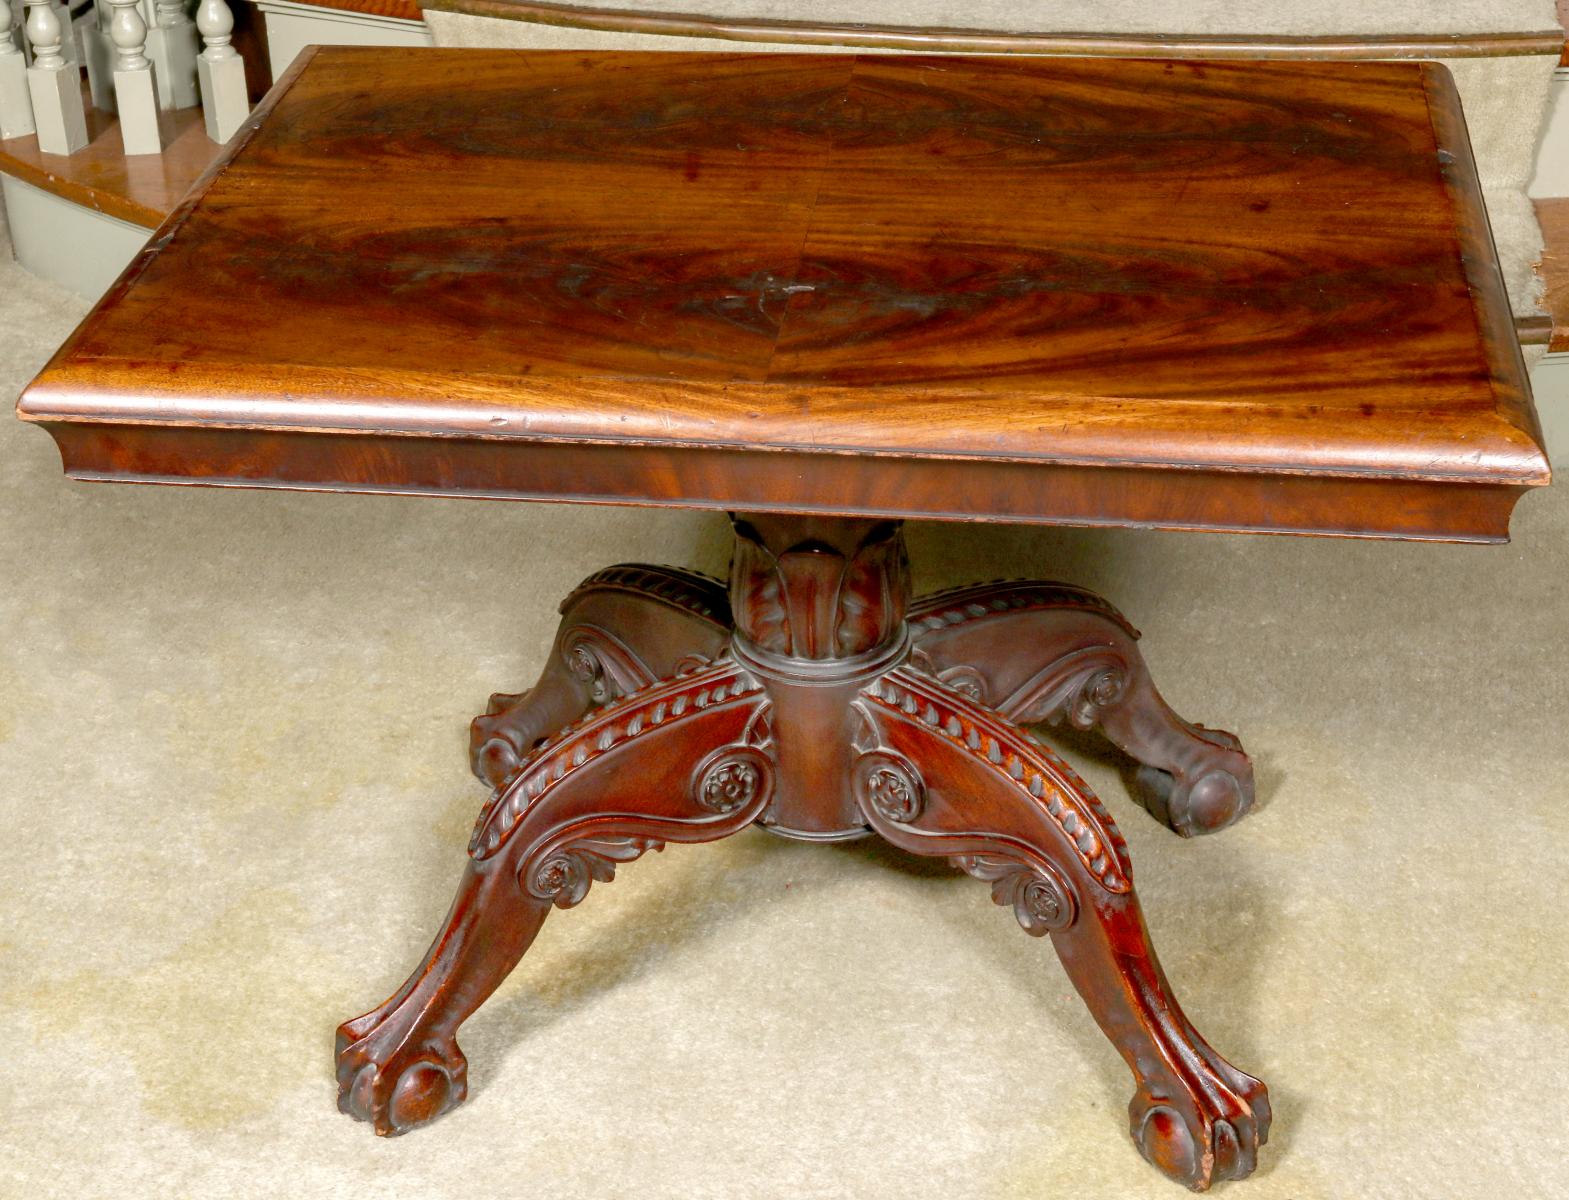 A FINE LOUIS PHILIPPE TABLE WITH FLAME MAHOGANY TOP